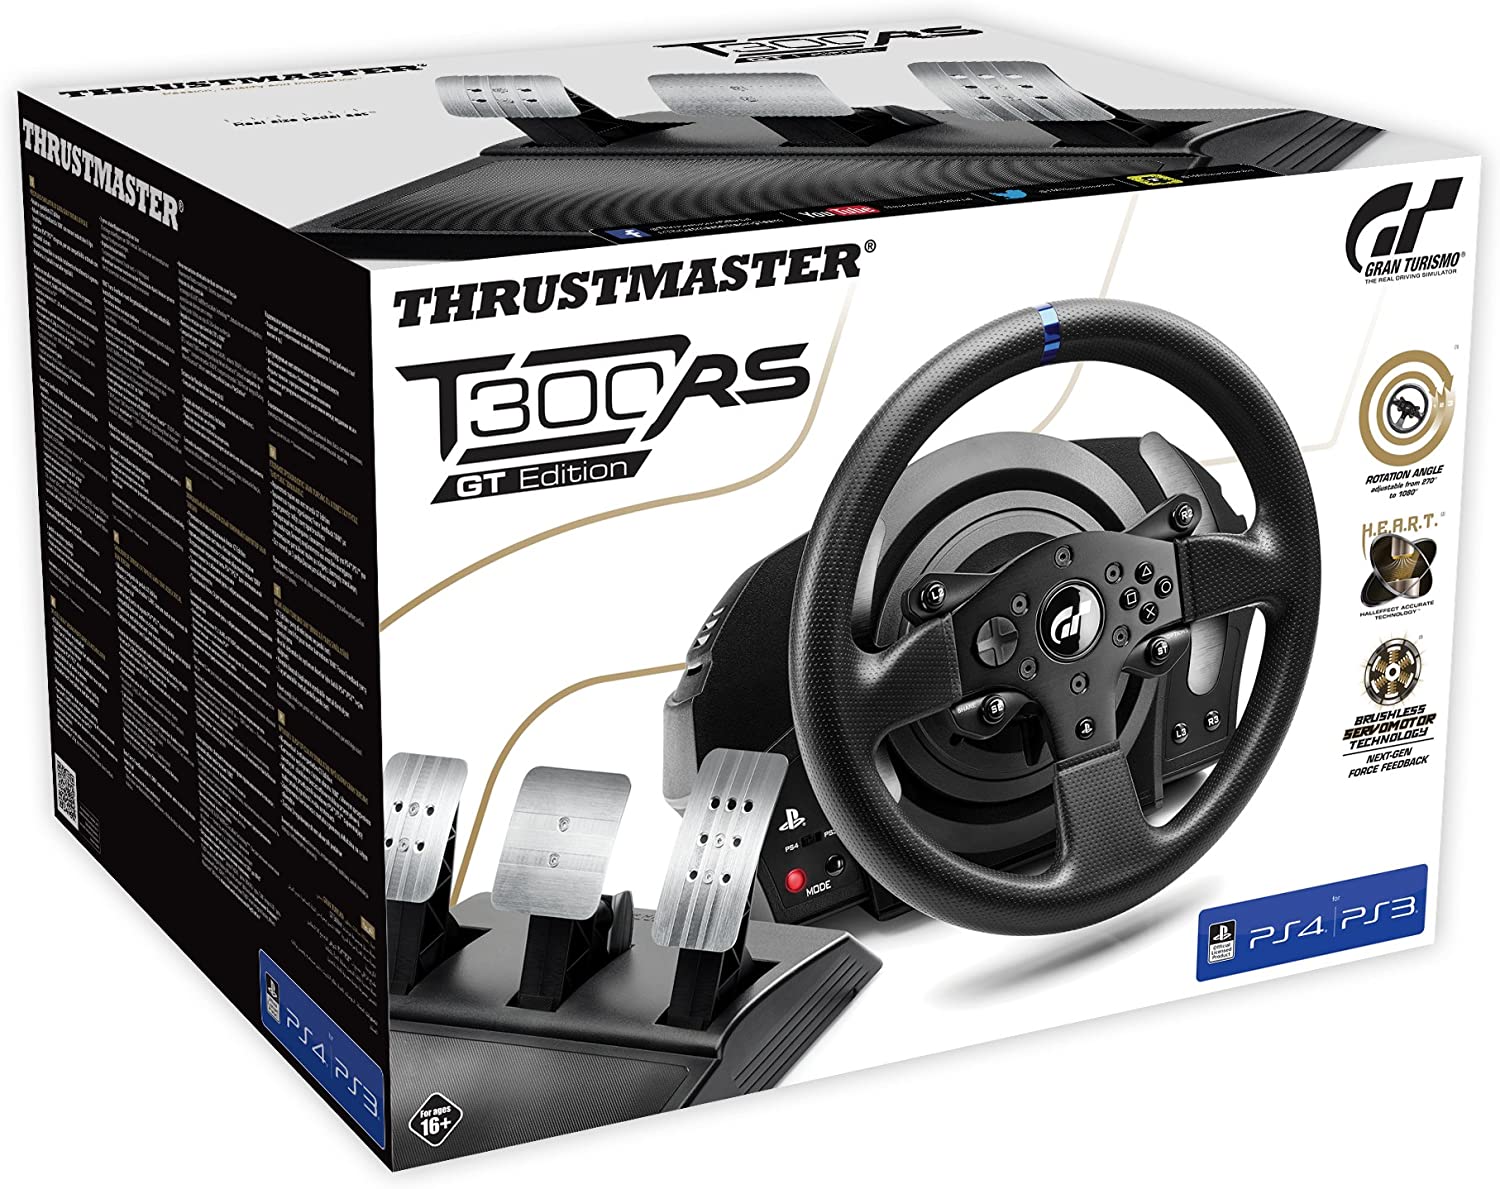 up Academy ACC Dave to for - set Thrustmaster Coach your How T300RS